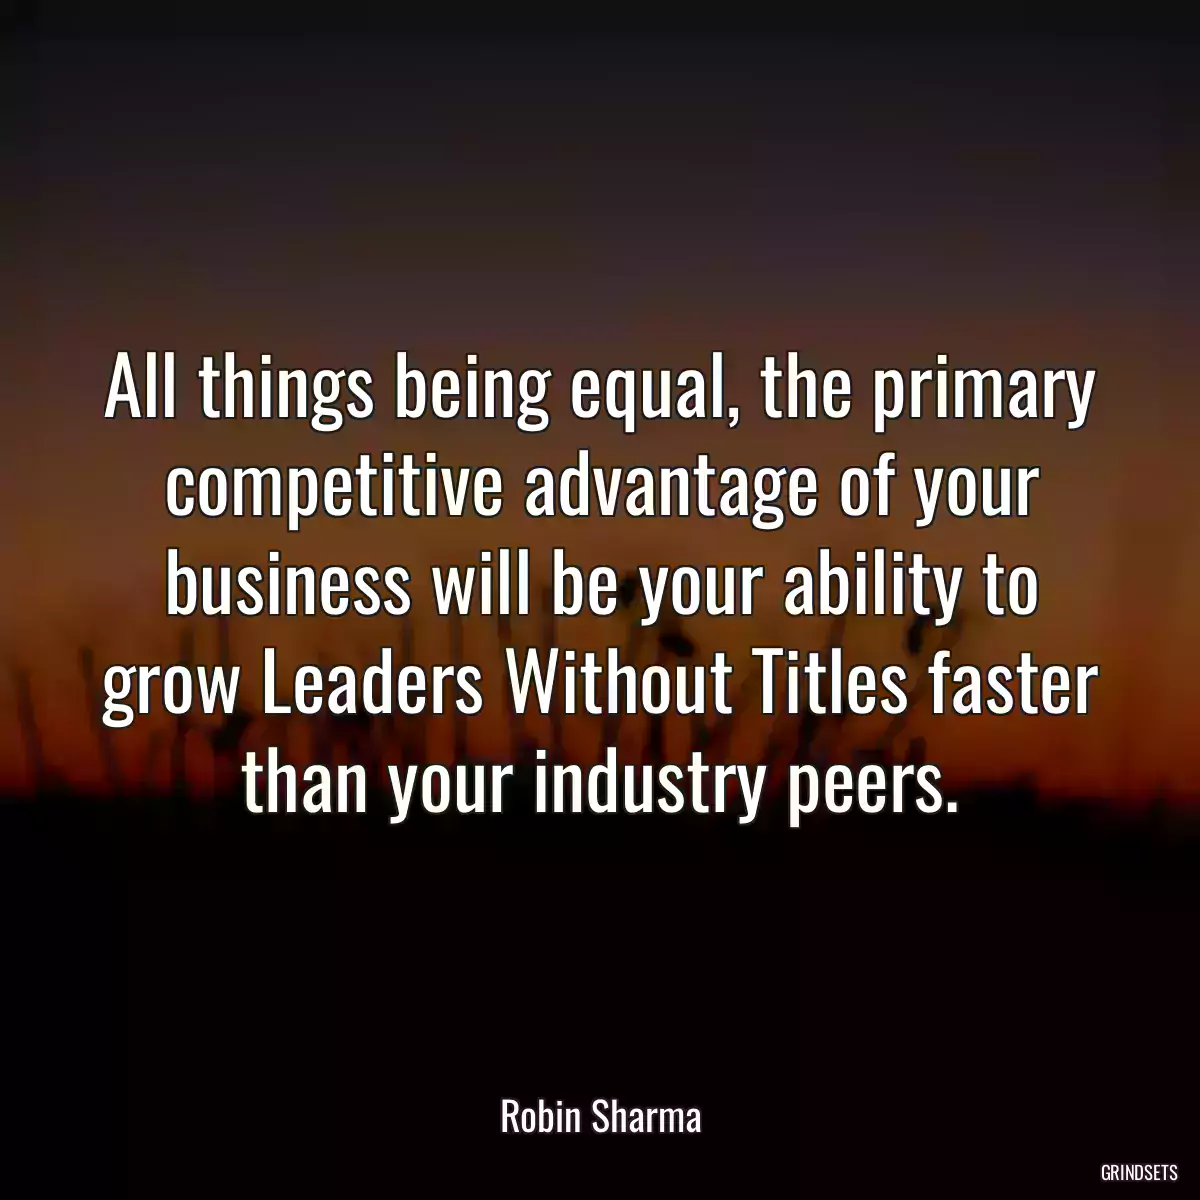 All things being equal, the primary competitive advantage of your business will be your ability to grow Leaders Without Titles faster than your industry peers.